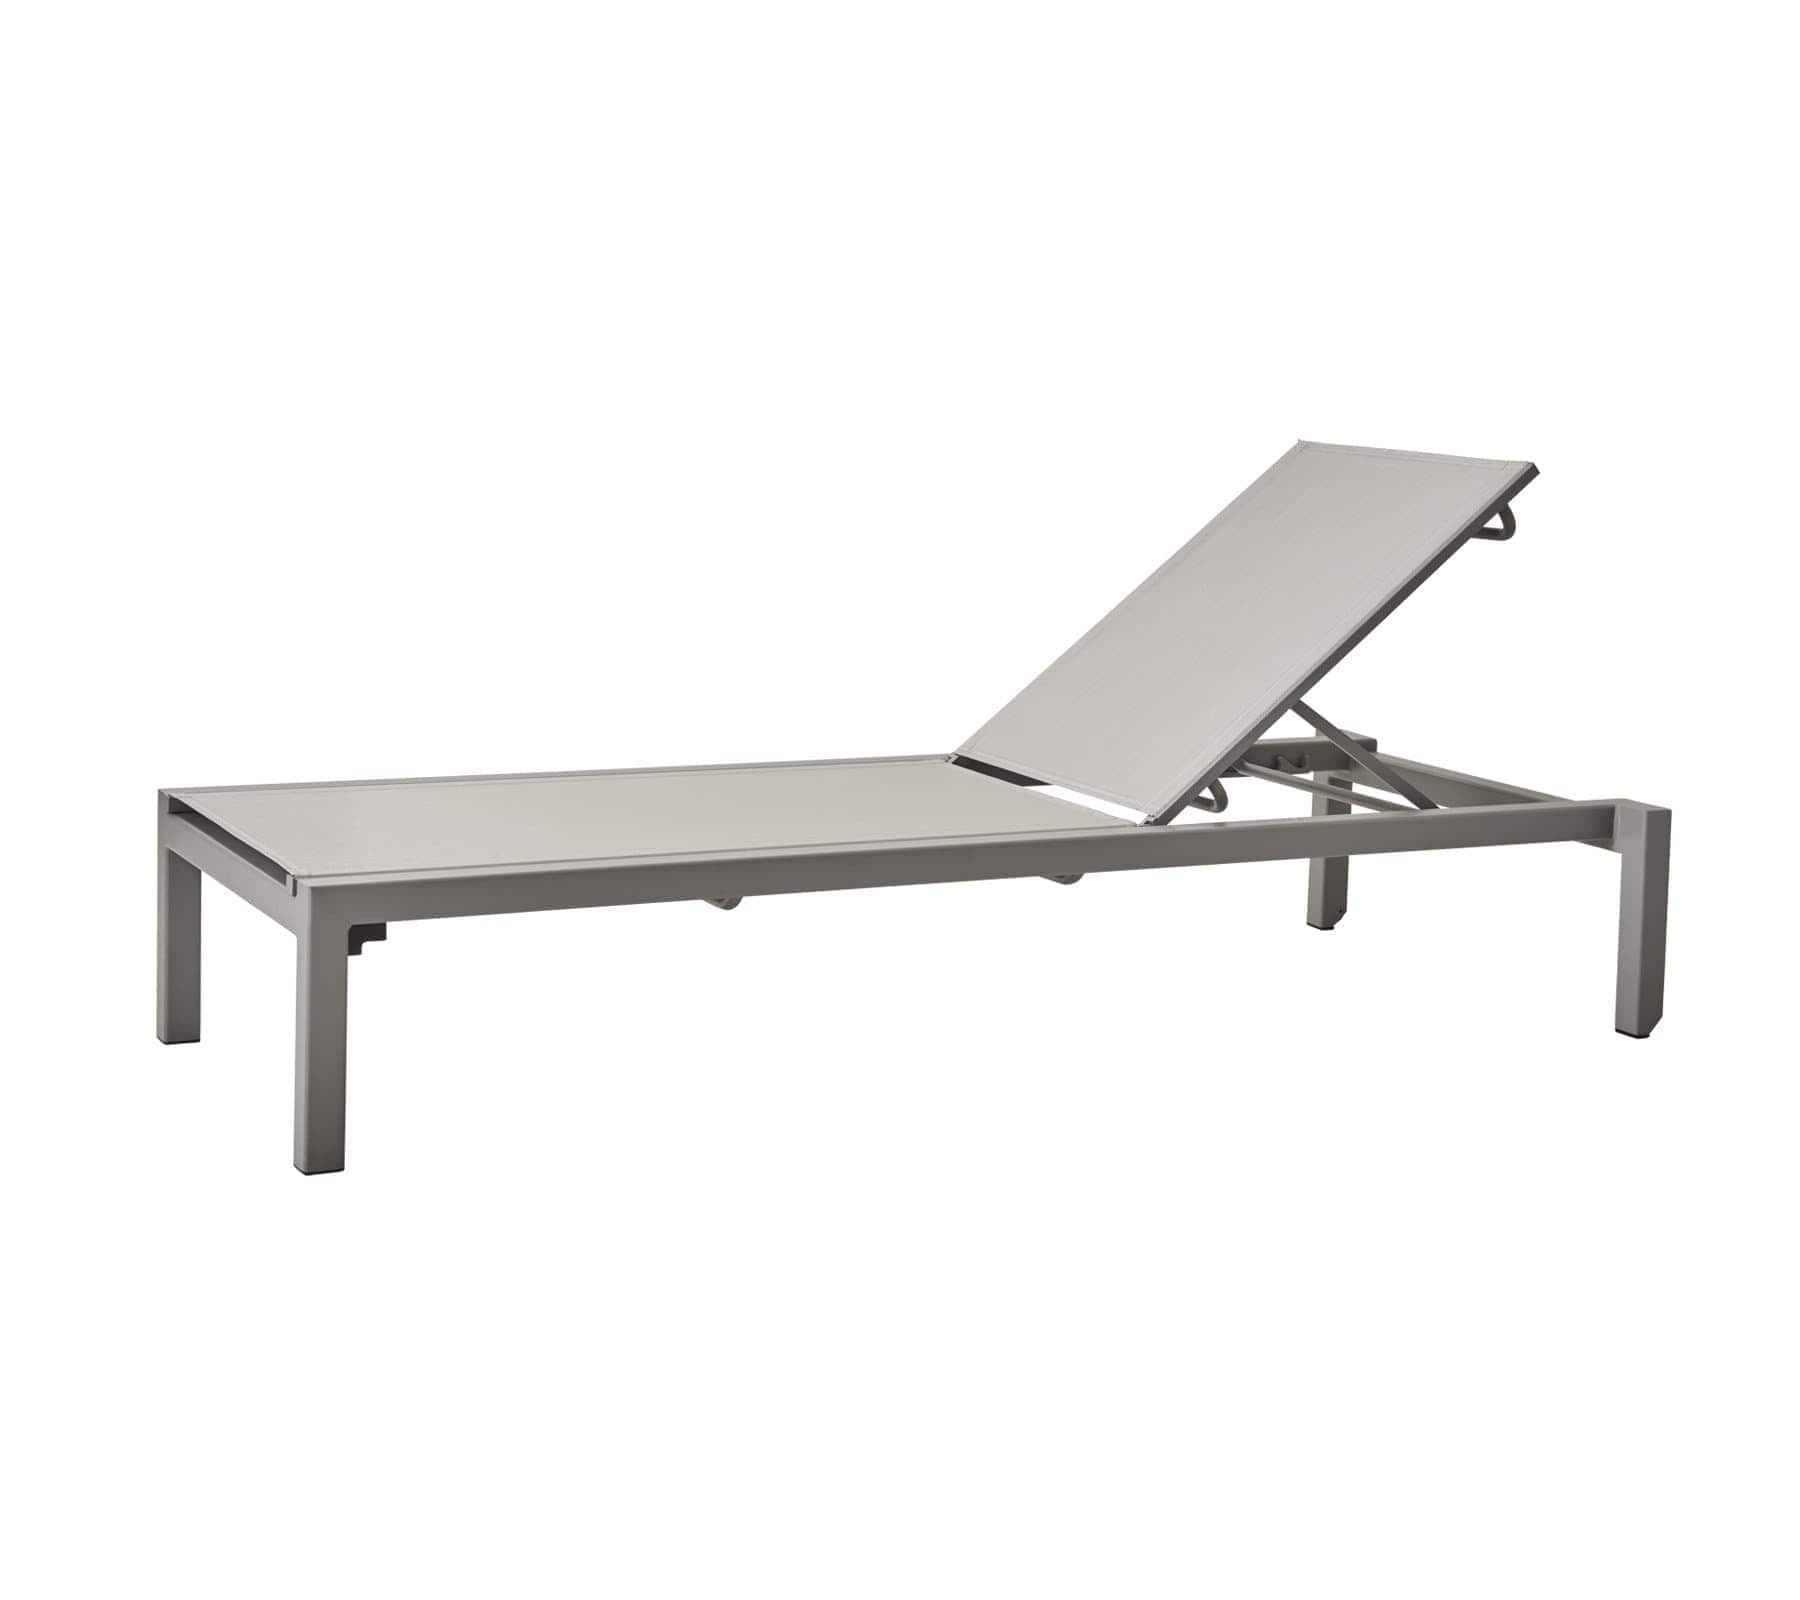 Boxhill's Relax light grey outdoor chaise lounge without cushion on white background